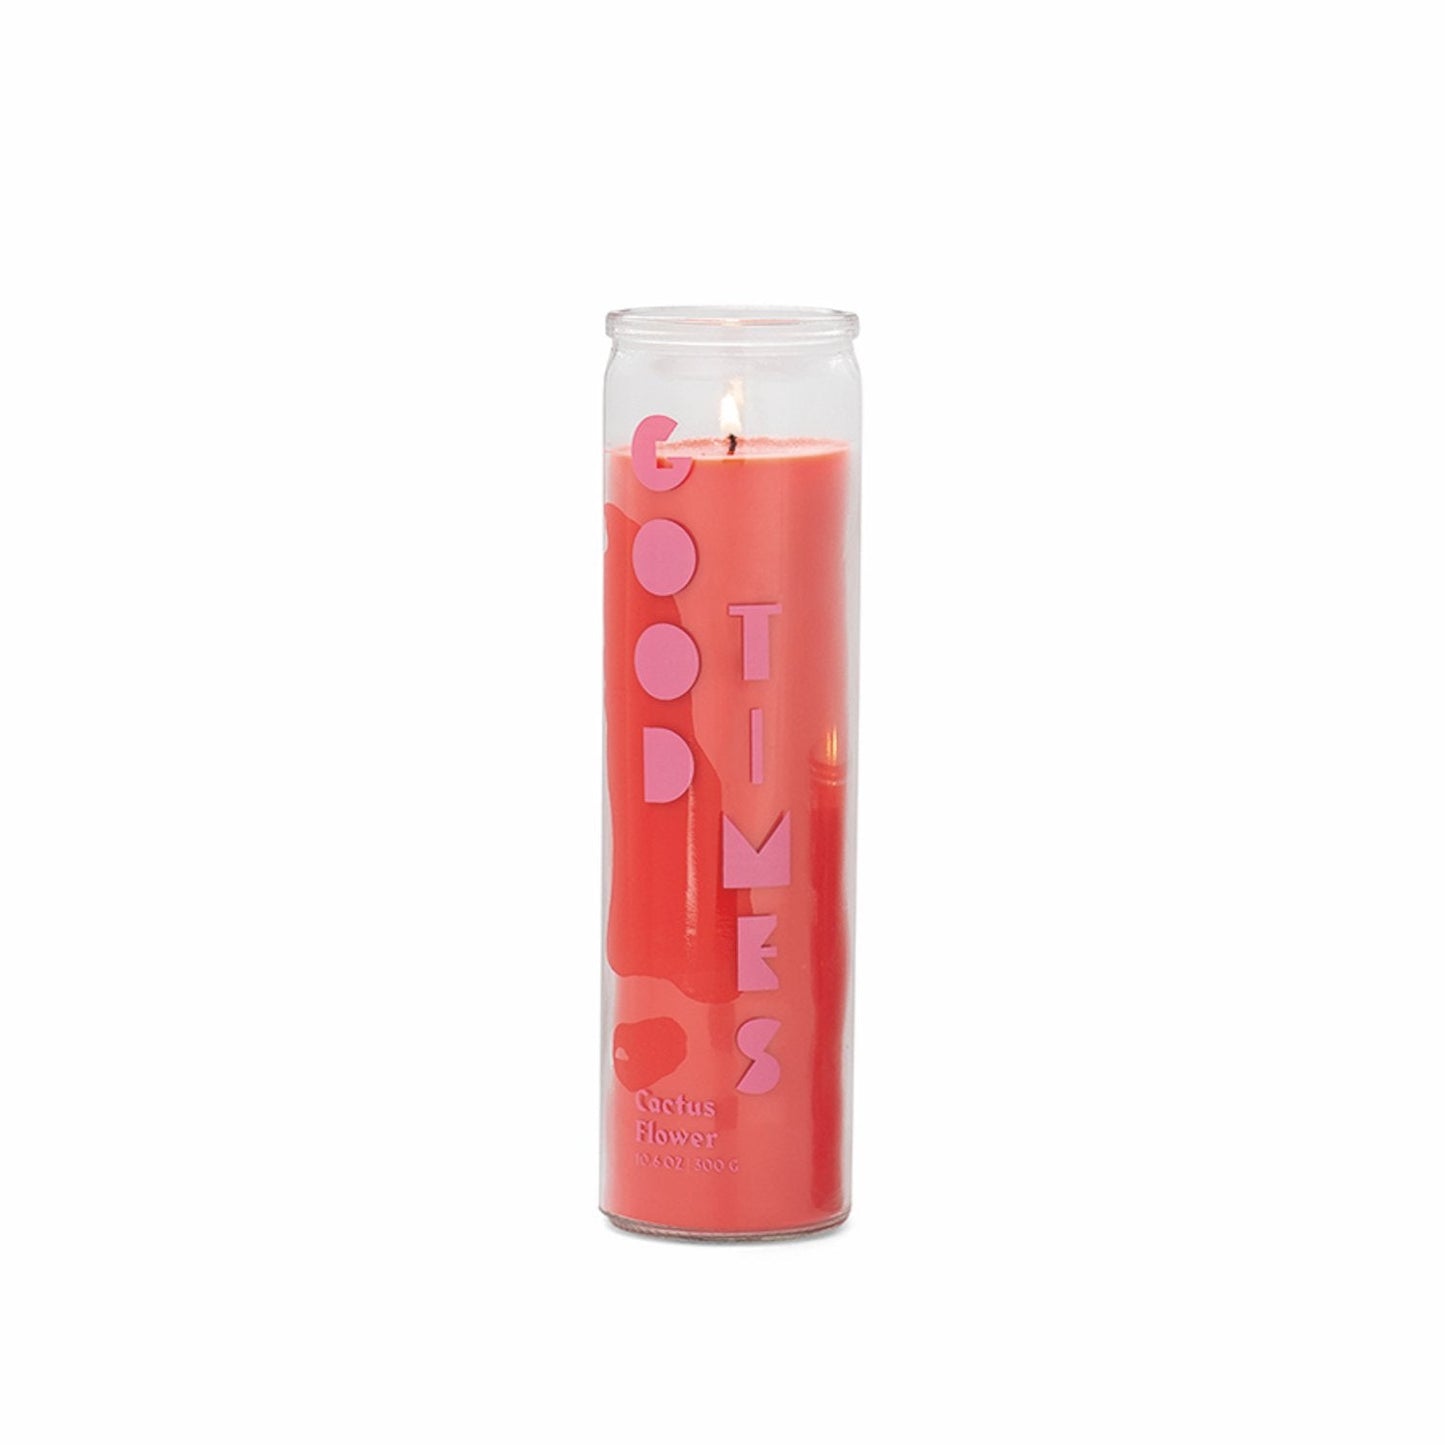 Spark Candle - Good Times - Cactus Flower (300g)